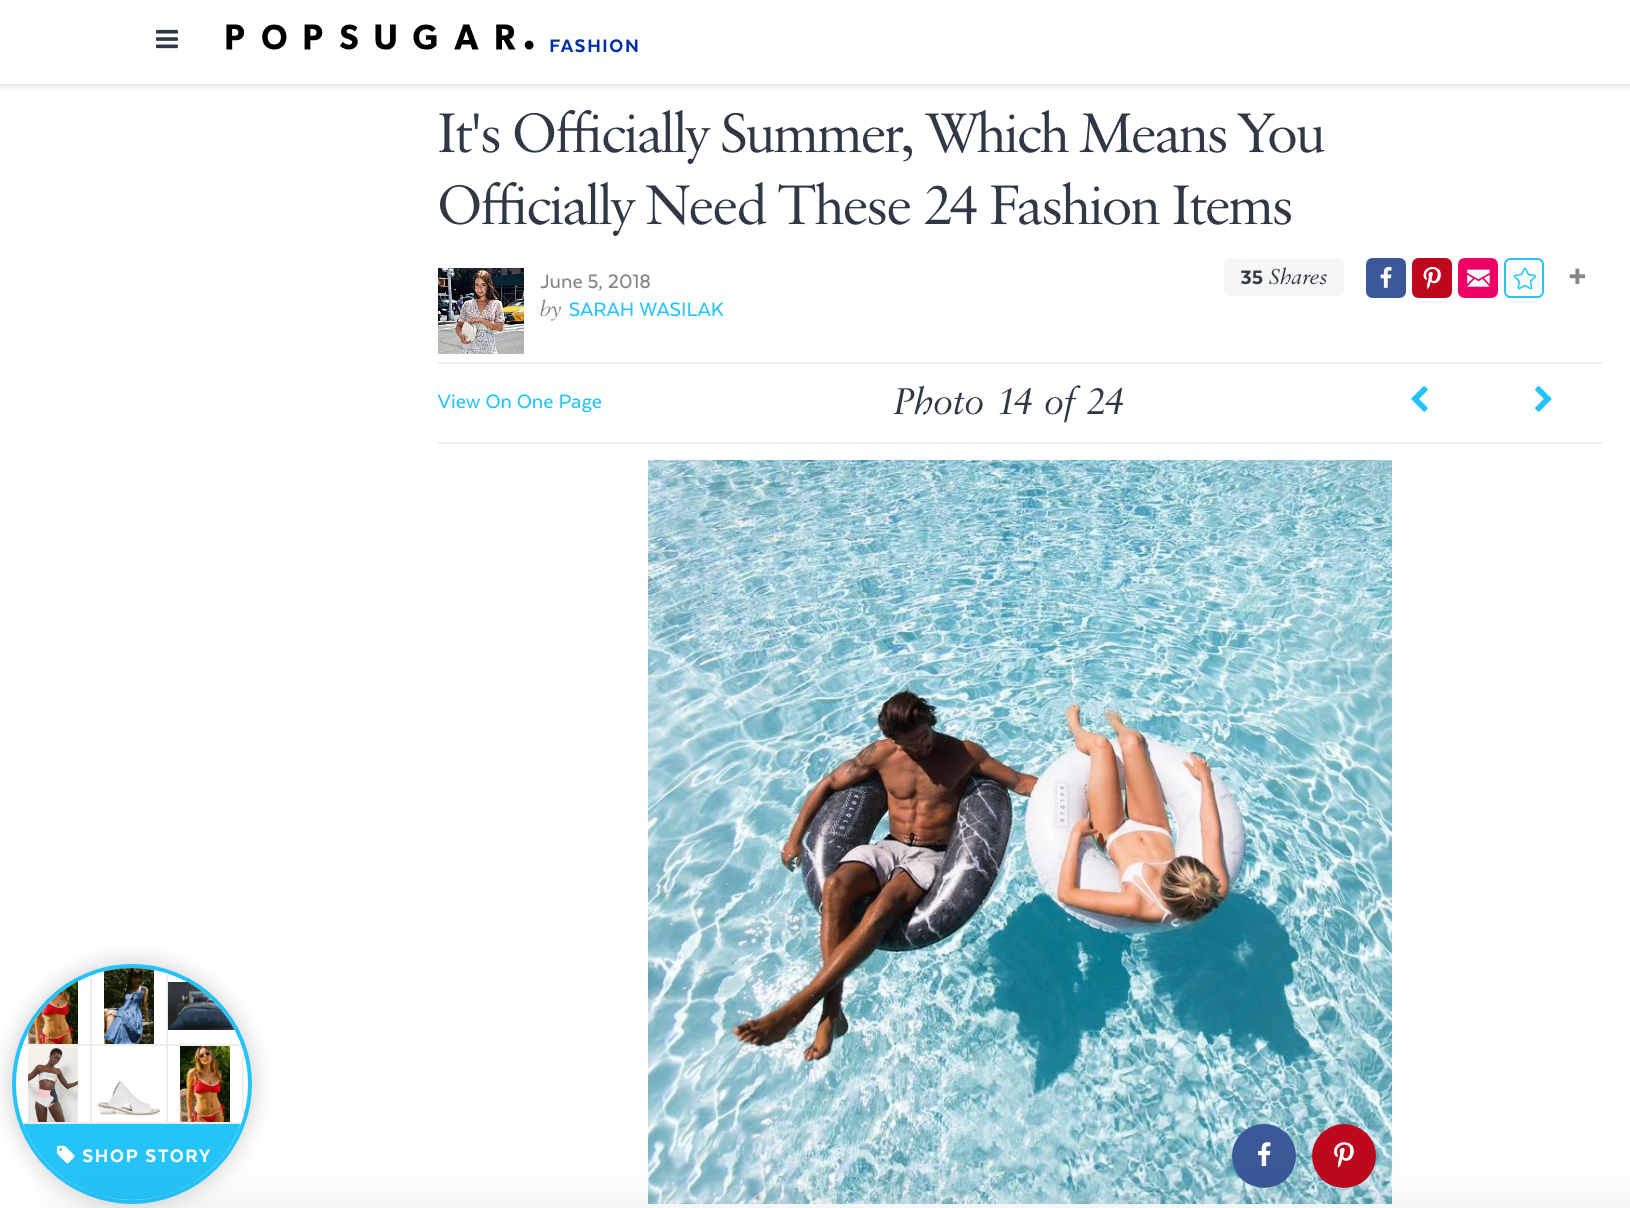 POPSUGAR: It's Officially Summer, Which Means You Officially Need These 24 Fashion Items